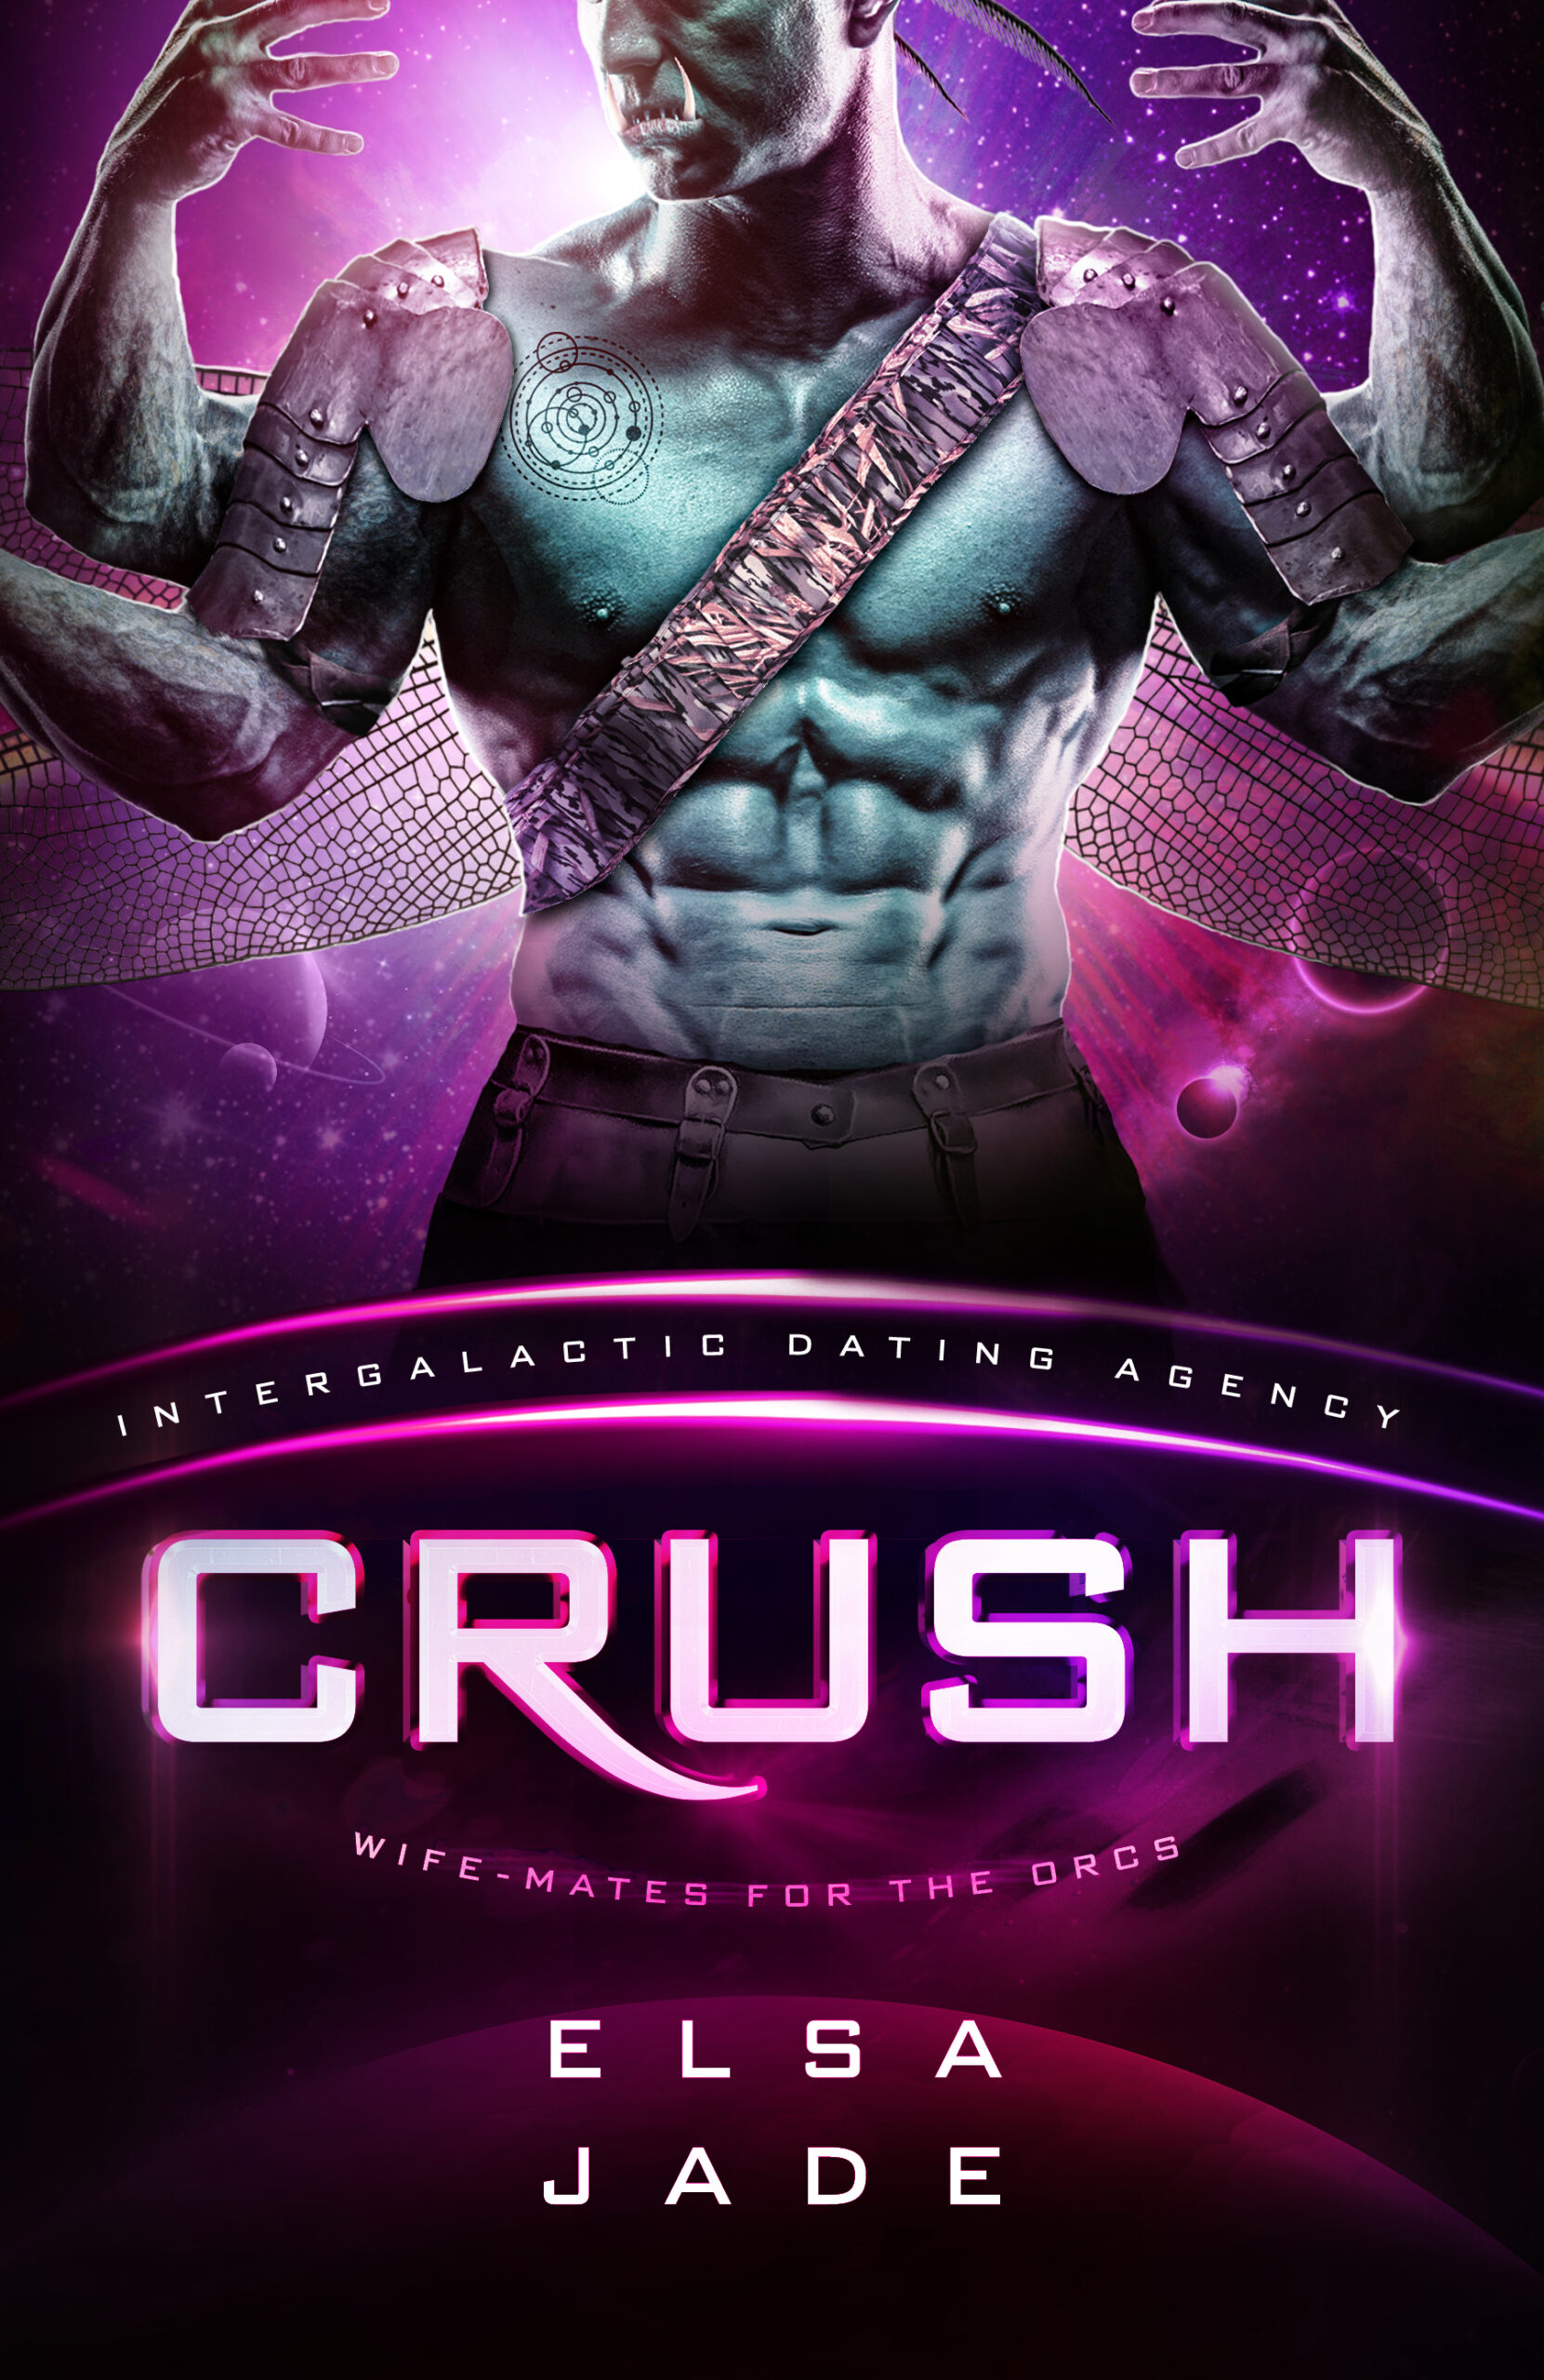 Crush: Wife-Mates for the Orcs (Intergalactic Dating Agency) Big Sky Alien Mail Order Brides Science Fiction Romance by Elsa Jade